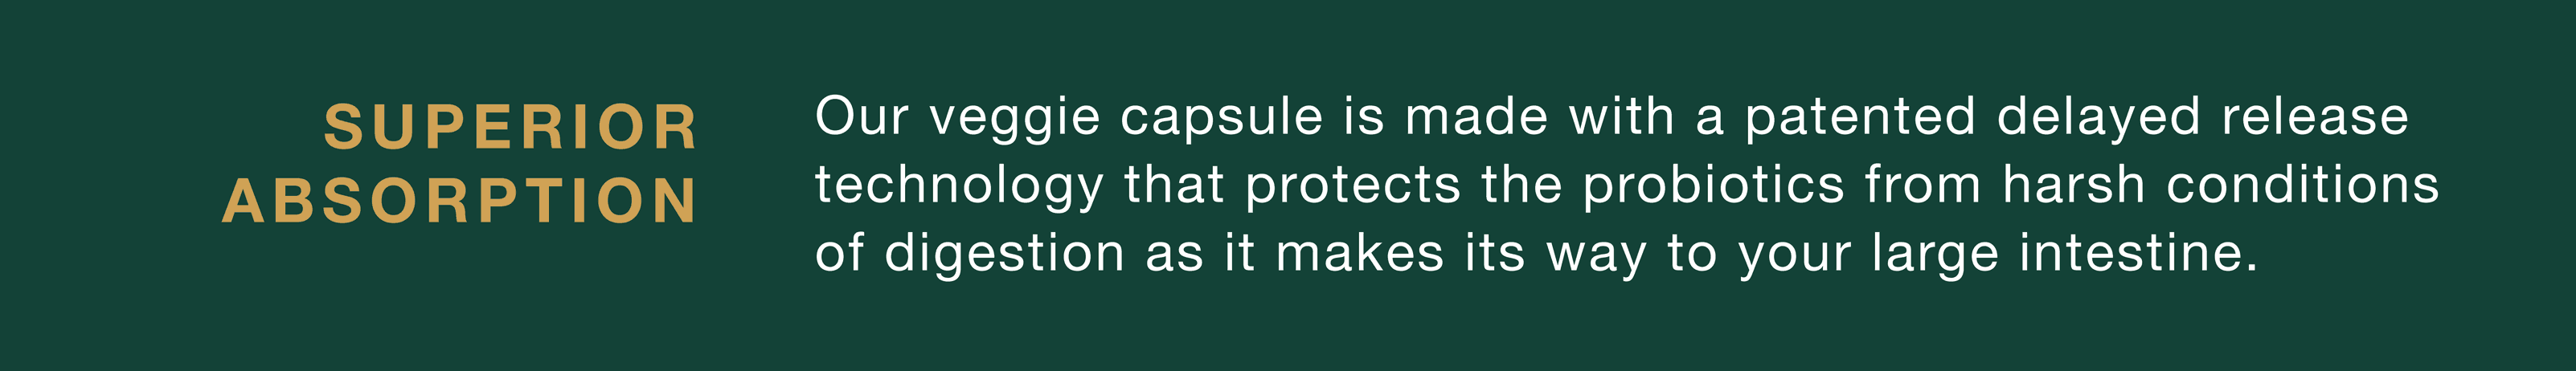 Our veggie capsule is made with a patented delayed release technology that protects the probiotics from harsh digestion